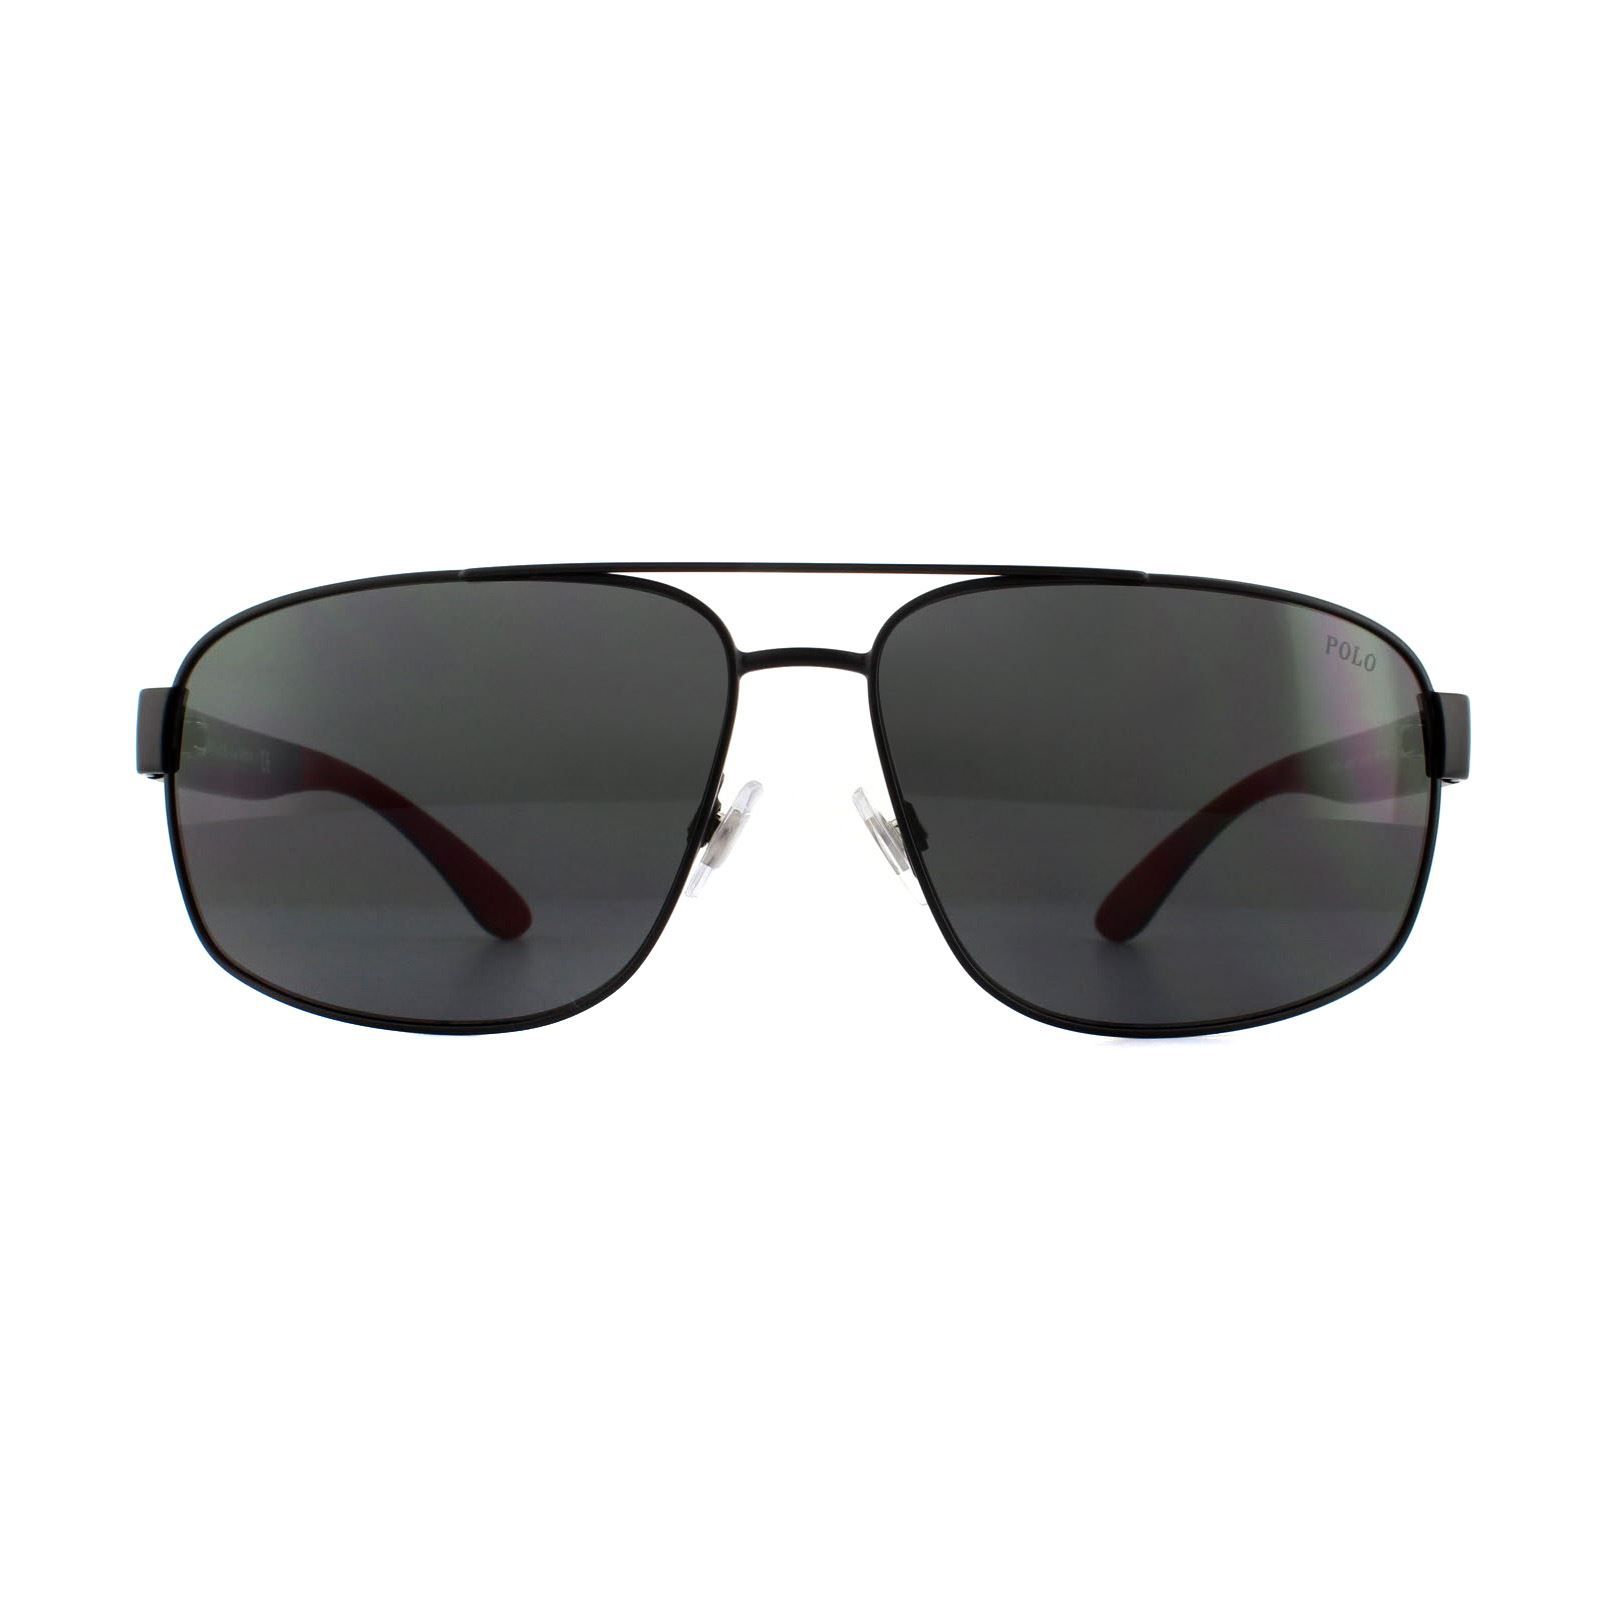 Polo Ralph Lauren Sunglasses 3112 903887 Matte Black Grey are a rectangular style aviator for men. The frame front is metal with plastic temples that adorn the iconic Polo Ralph Lauren logo in a contrasting colour and matching accents. Adjustable nose pads ensure a personalised and comfortable fit whilst looking stylish.